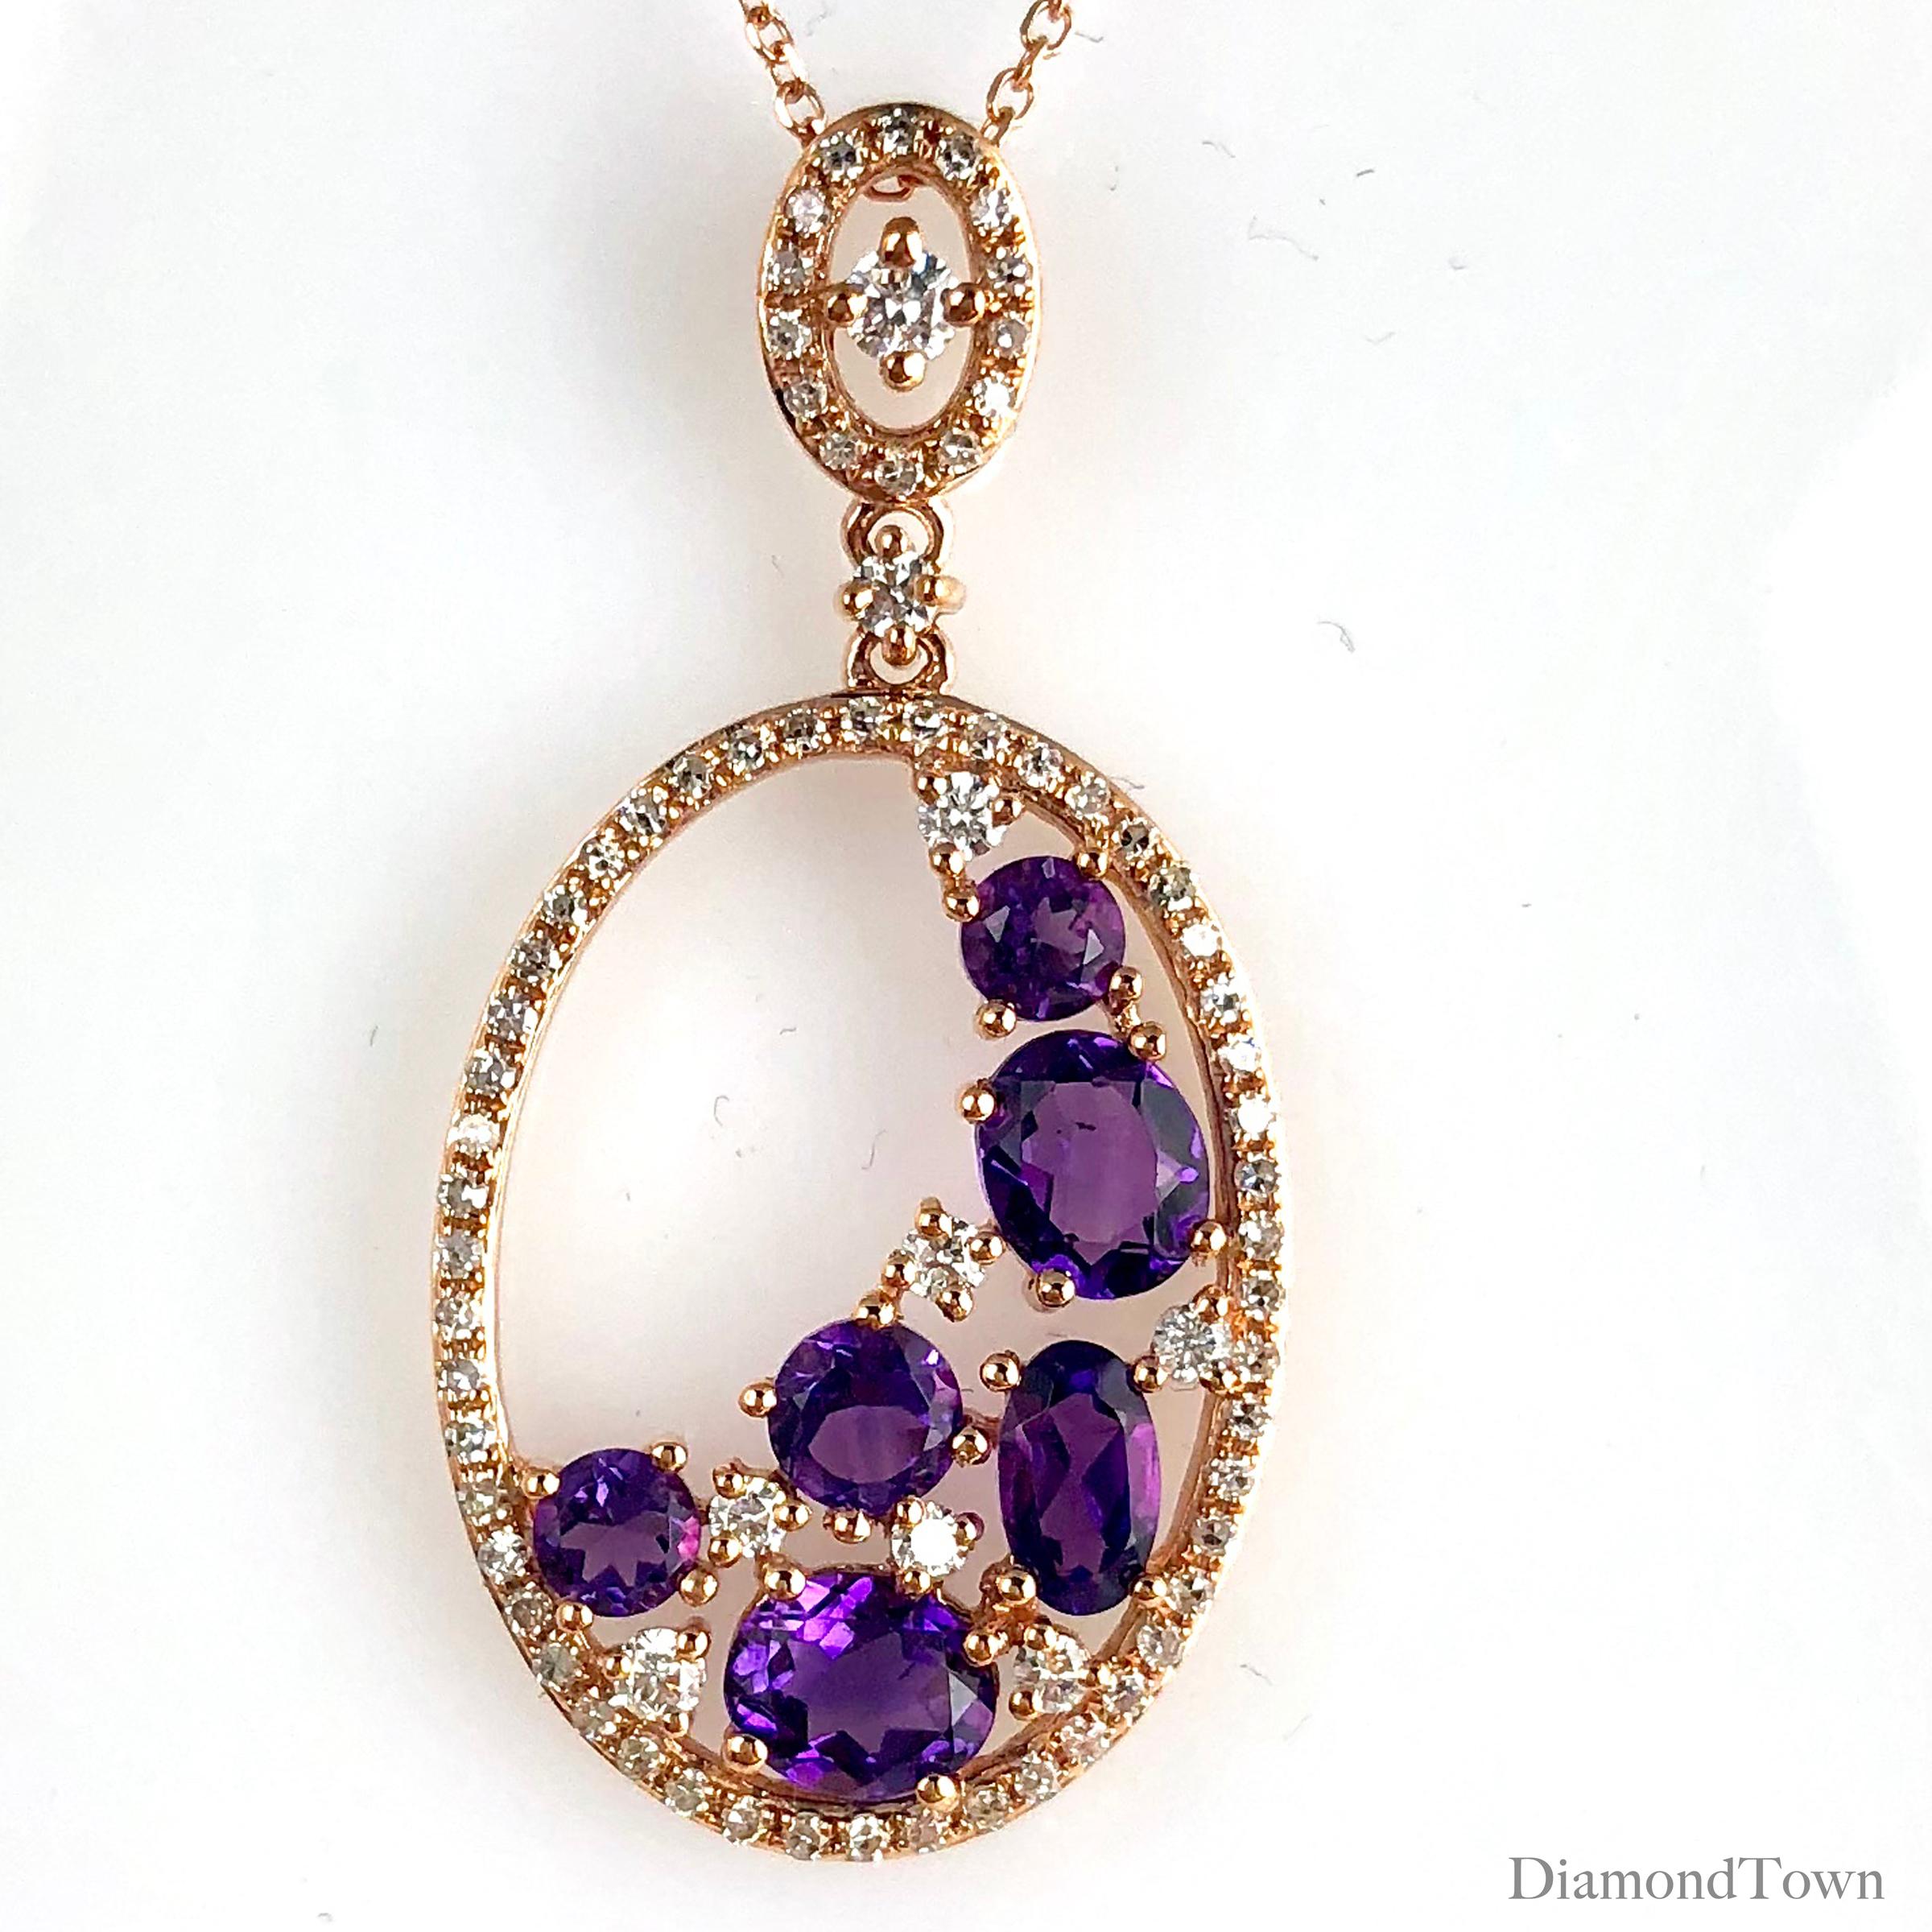 This fashion pendant boasts 1.24 carats beautiful round and oval amethysts, and round diamonds. The pendant's oval shape is formed by a halo of round white diamonds, with additional diamonds in the decorated bail. Total diamond weight 0.36